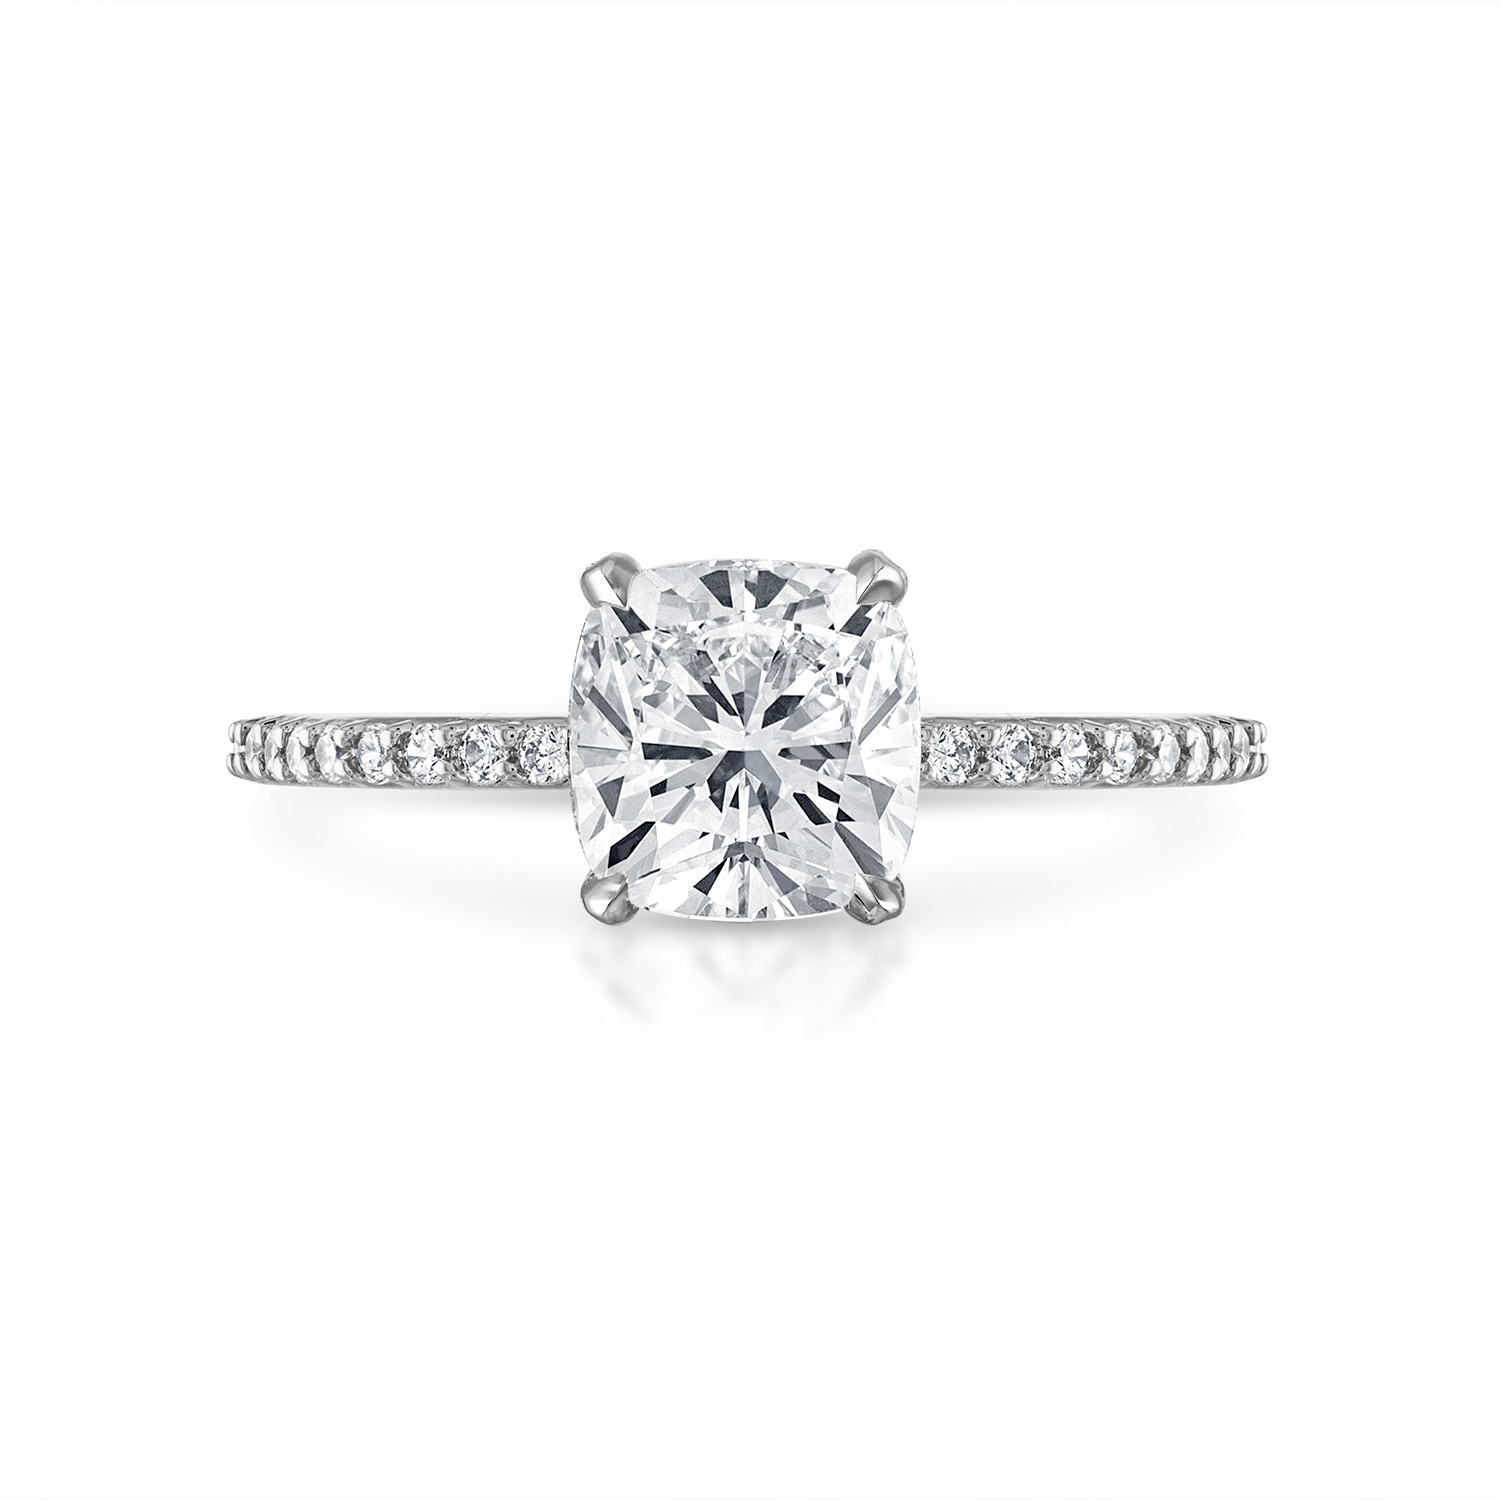 Cushion Pave with Pave Underbezel Engagement Ring in Platinum